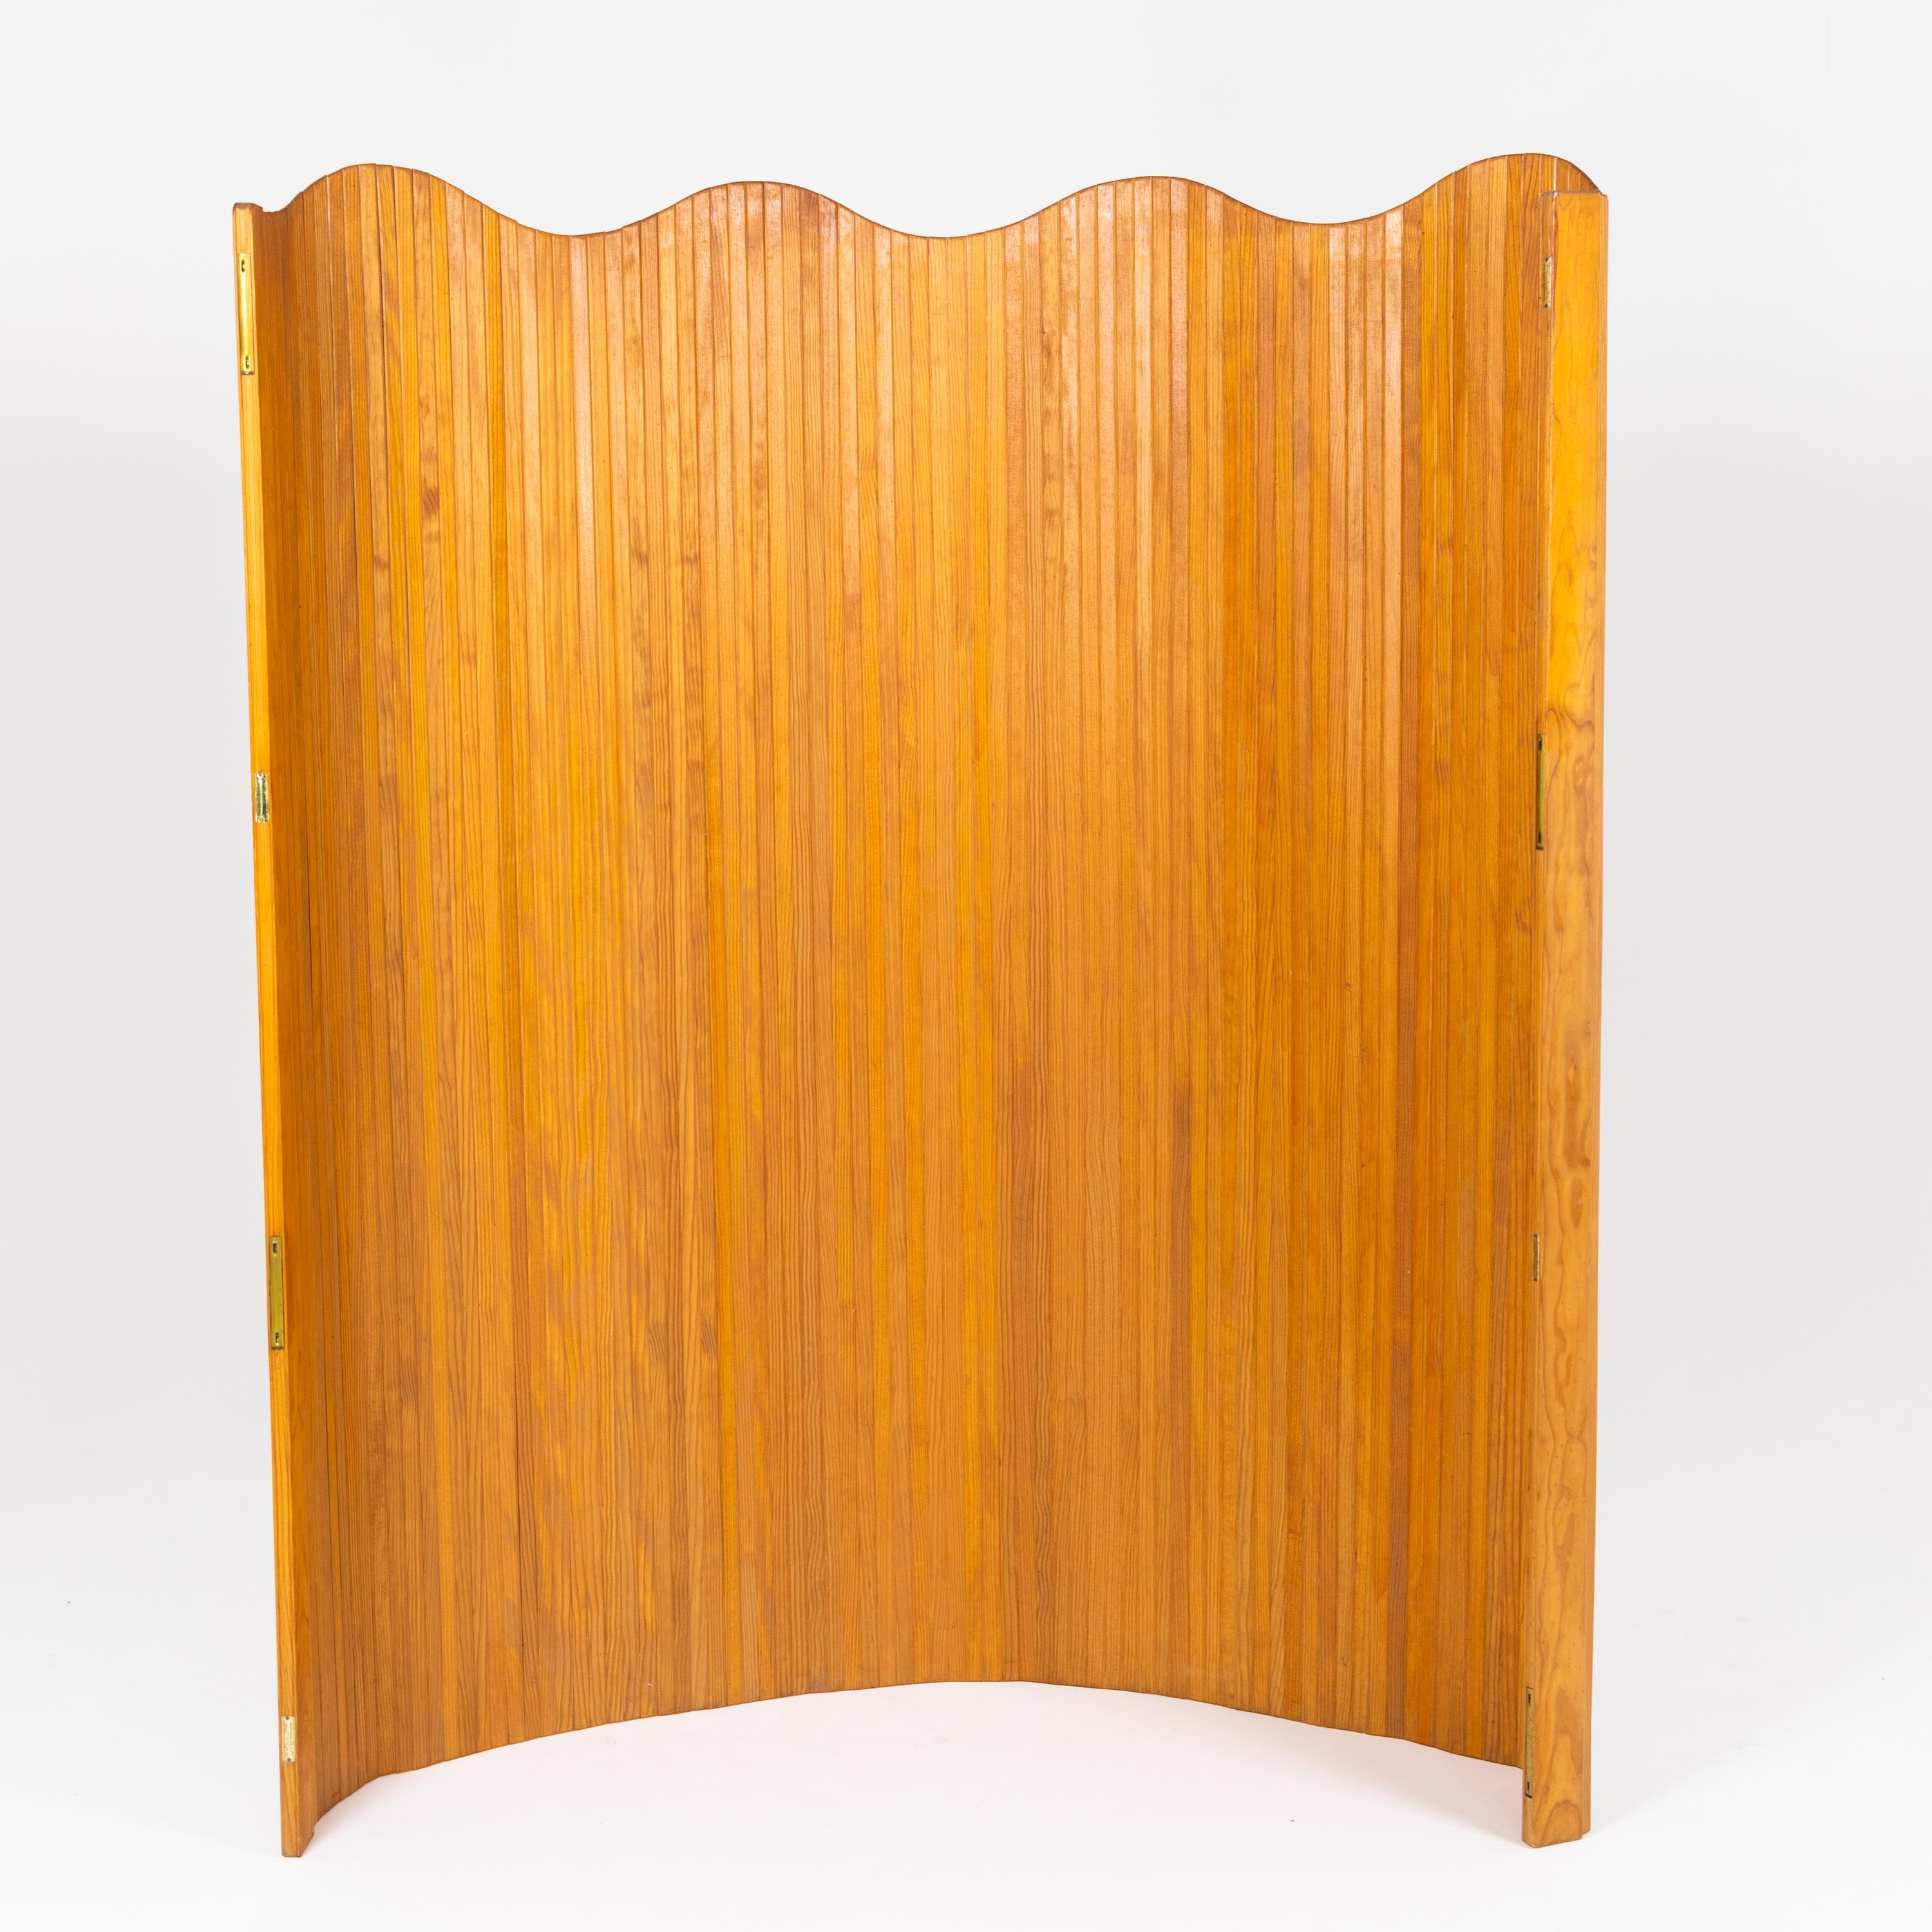 Large, scalloped room divider or screen made of individual slats by Baumann Fils & Cie, Paris. The blind-like construction allows the screen to be placed in different shapes. Inscribed on a plaque.
  